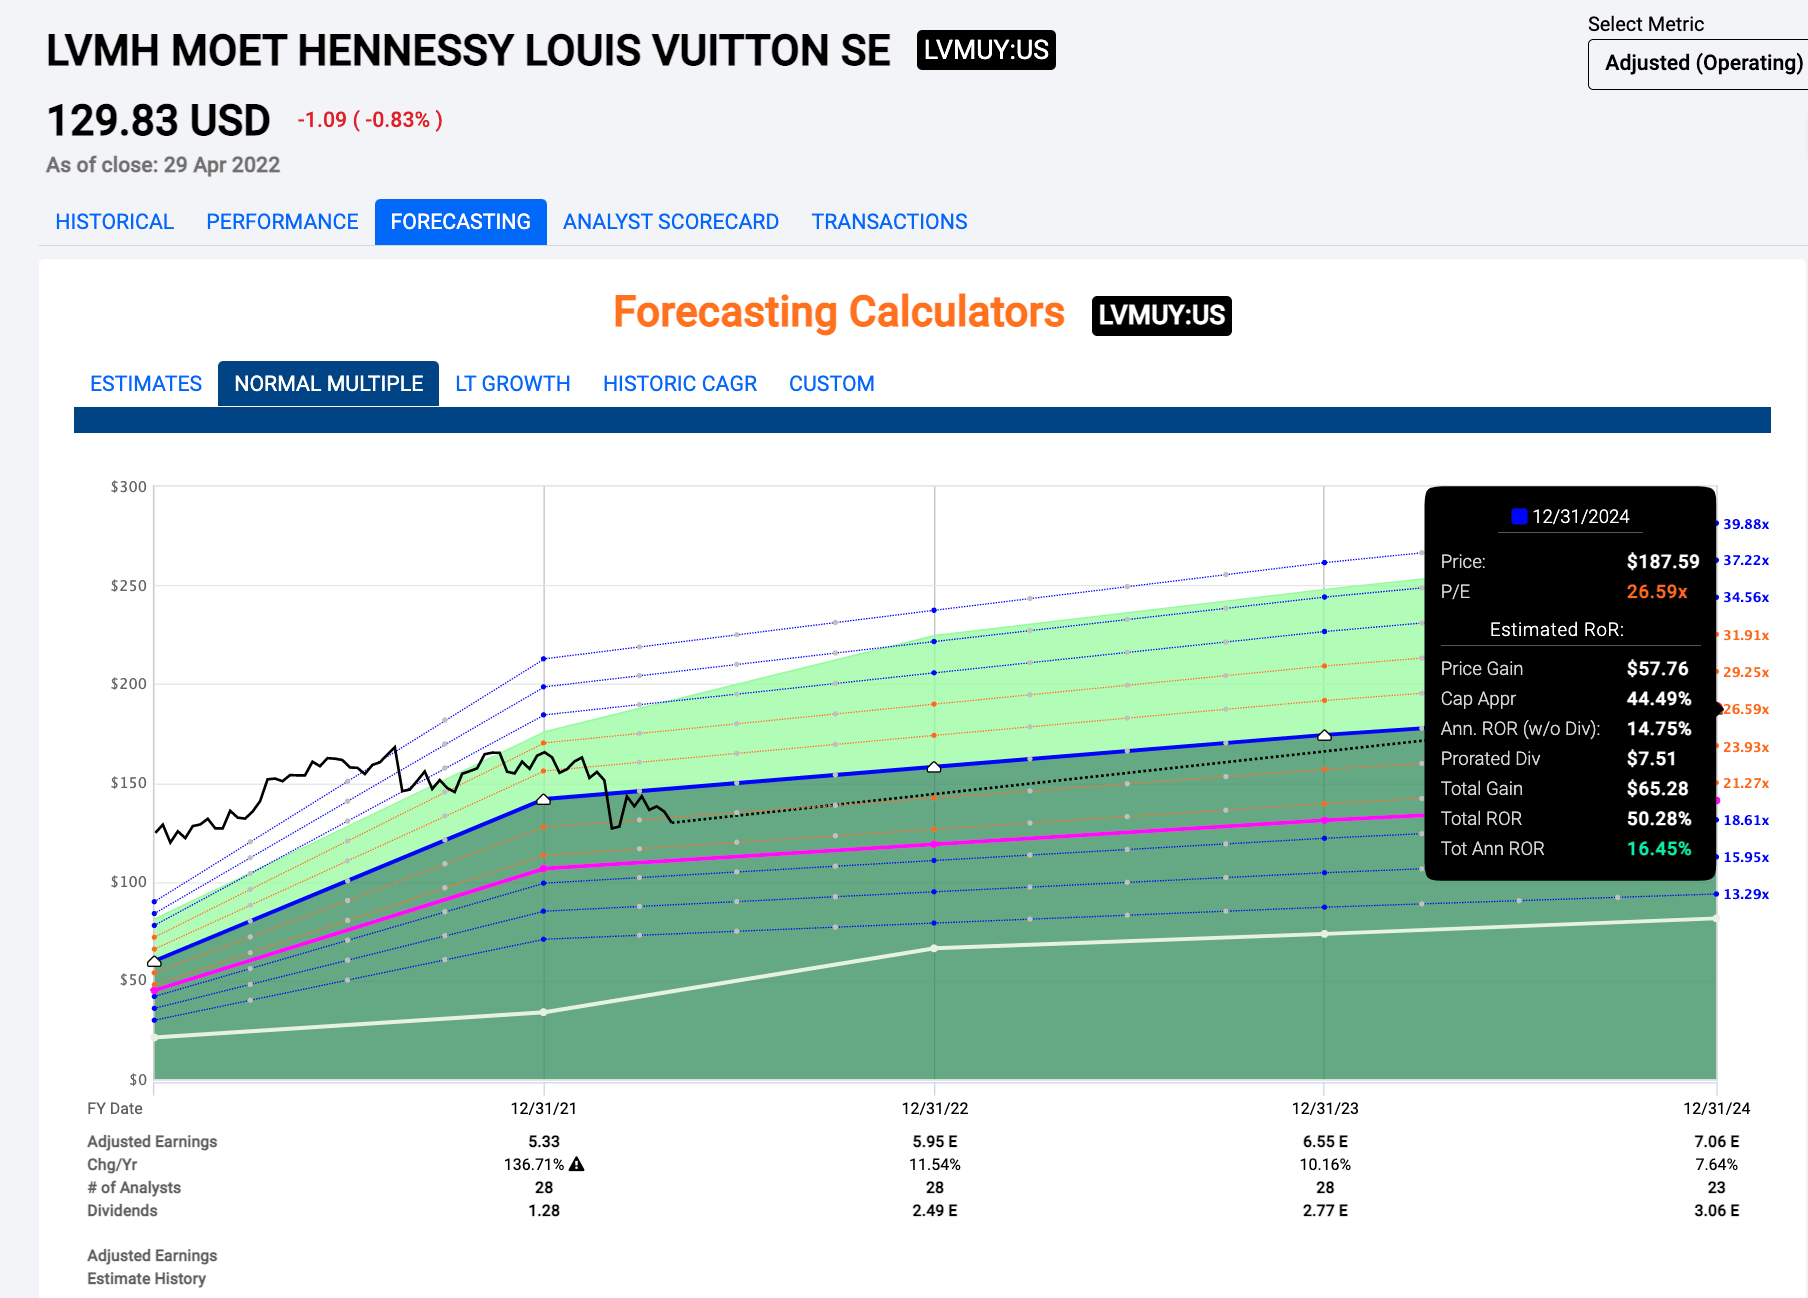 LVMH Moet Hennessy Louis Vuitton SE Stock Gives Every Indication Of Being  Significantly Overvalued